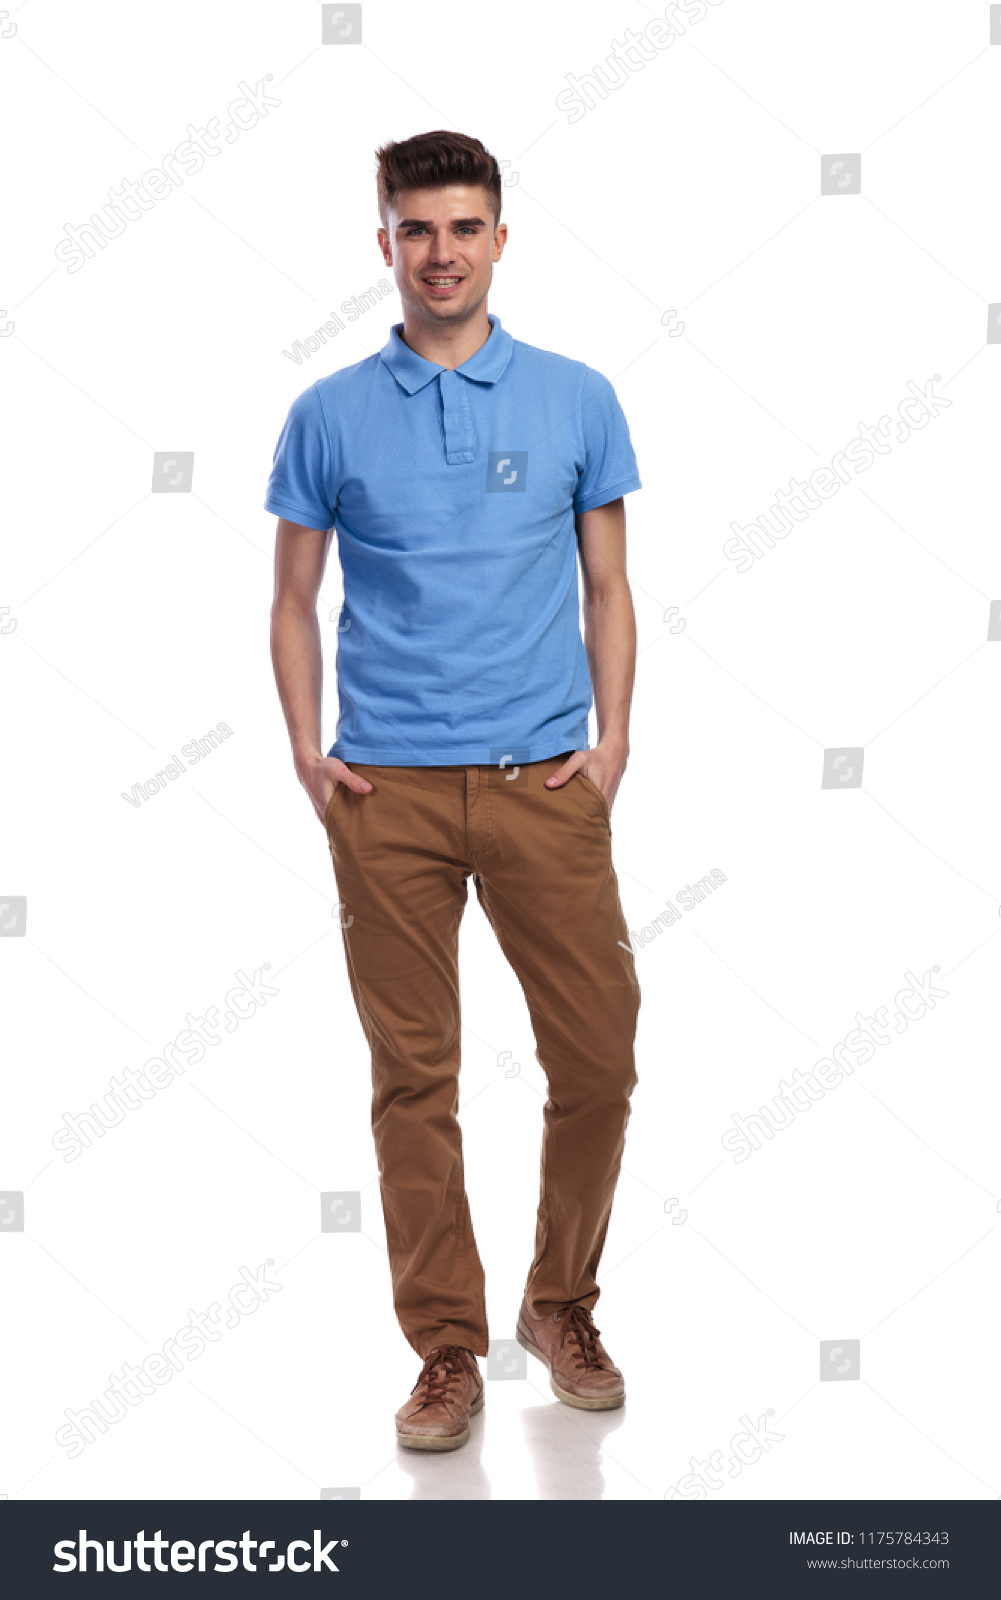 full body picture of a smiling casual man standing with hands in pockets on white background #1175784343